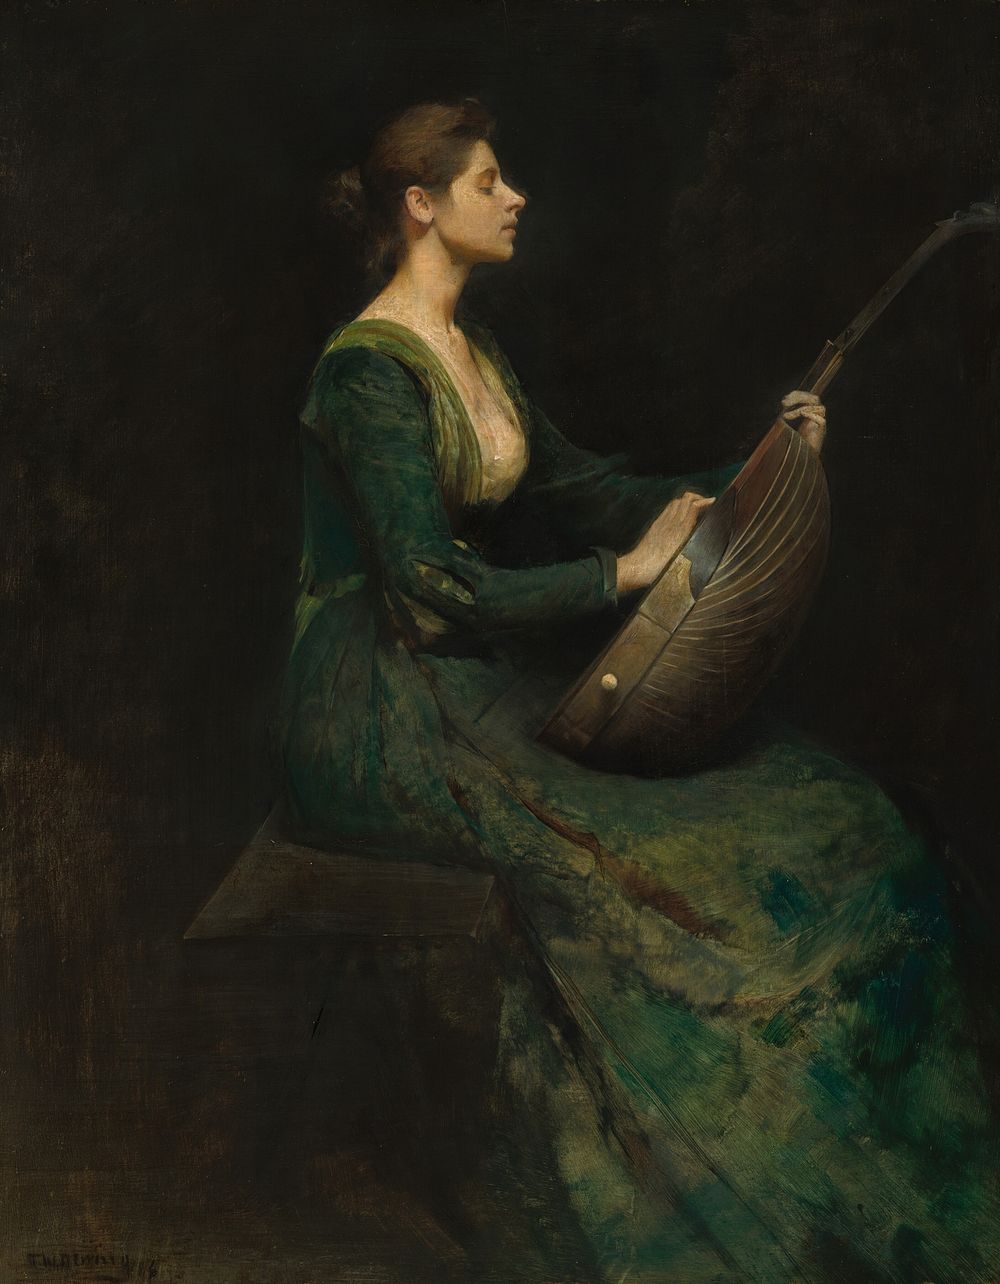 Lady with a Lute, (1886) by Thomas Wilmer Dewing.  